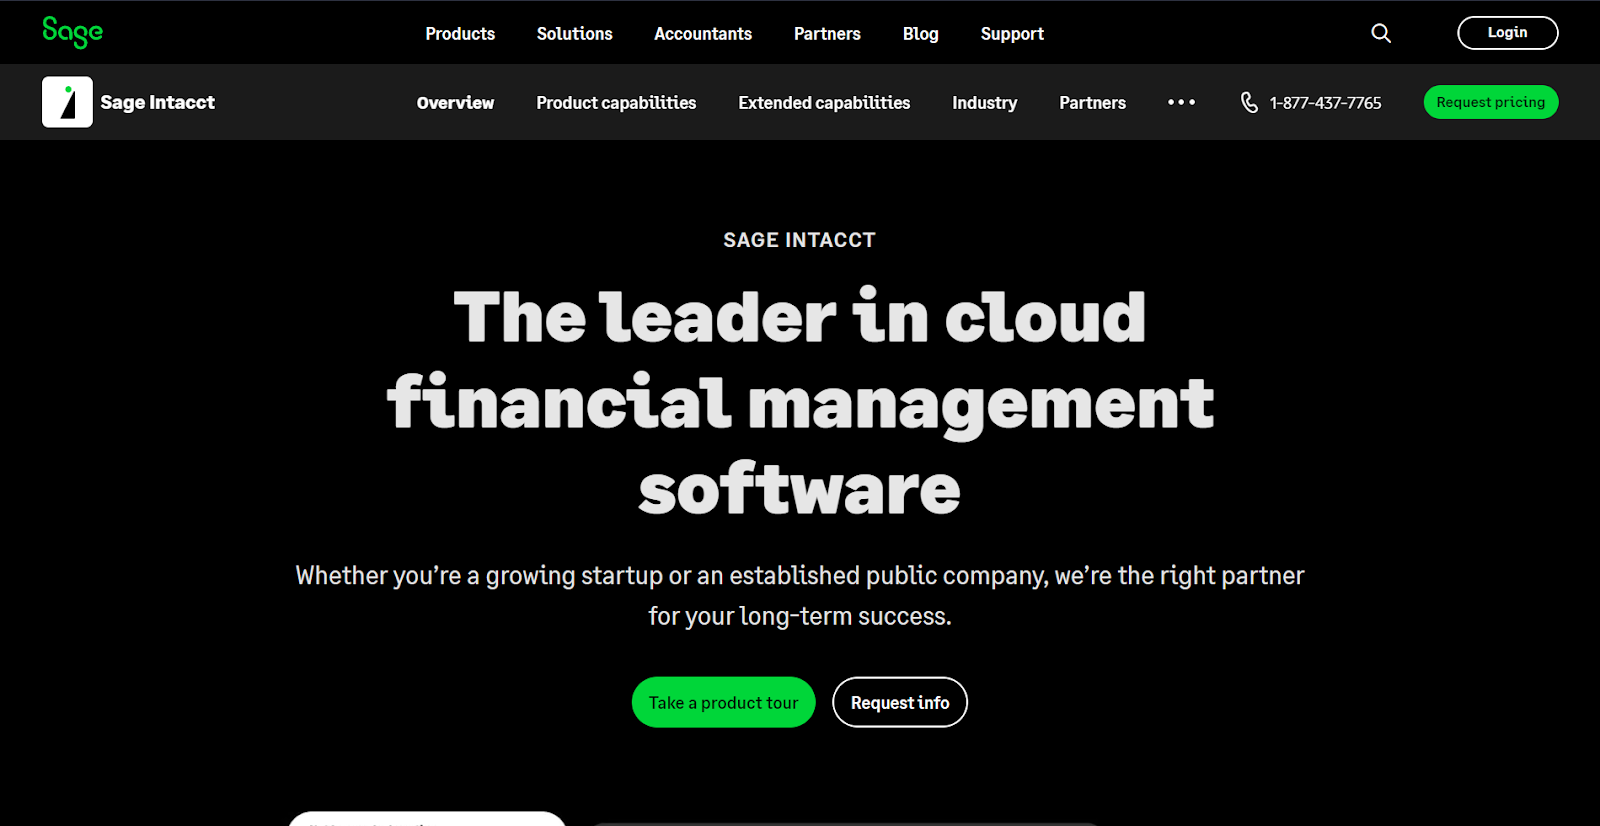 7 Best Small Business Accounting Software